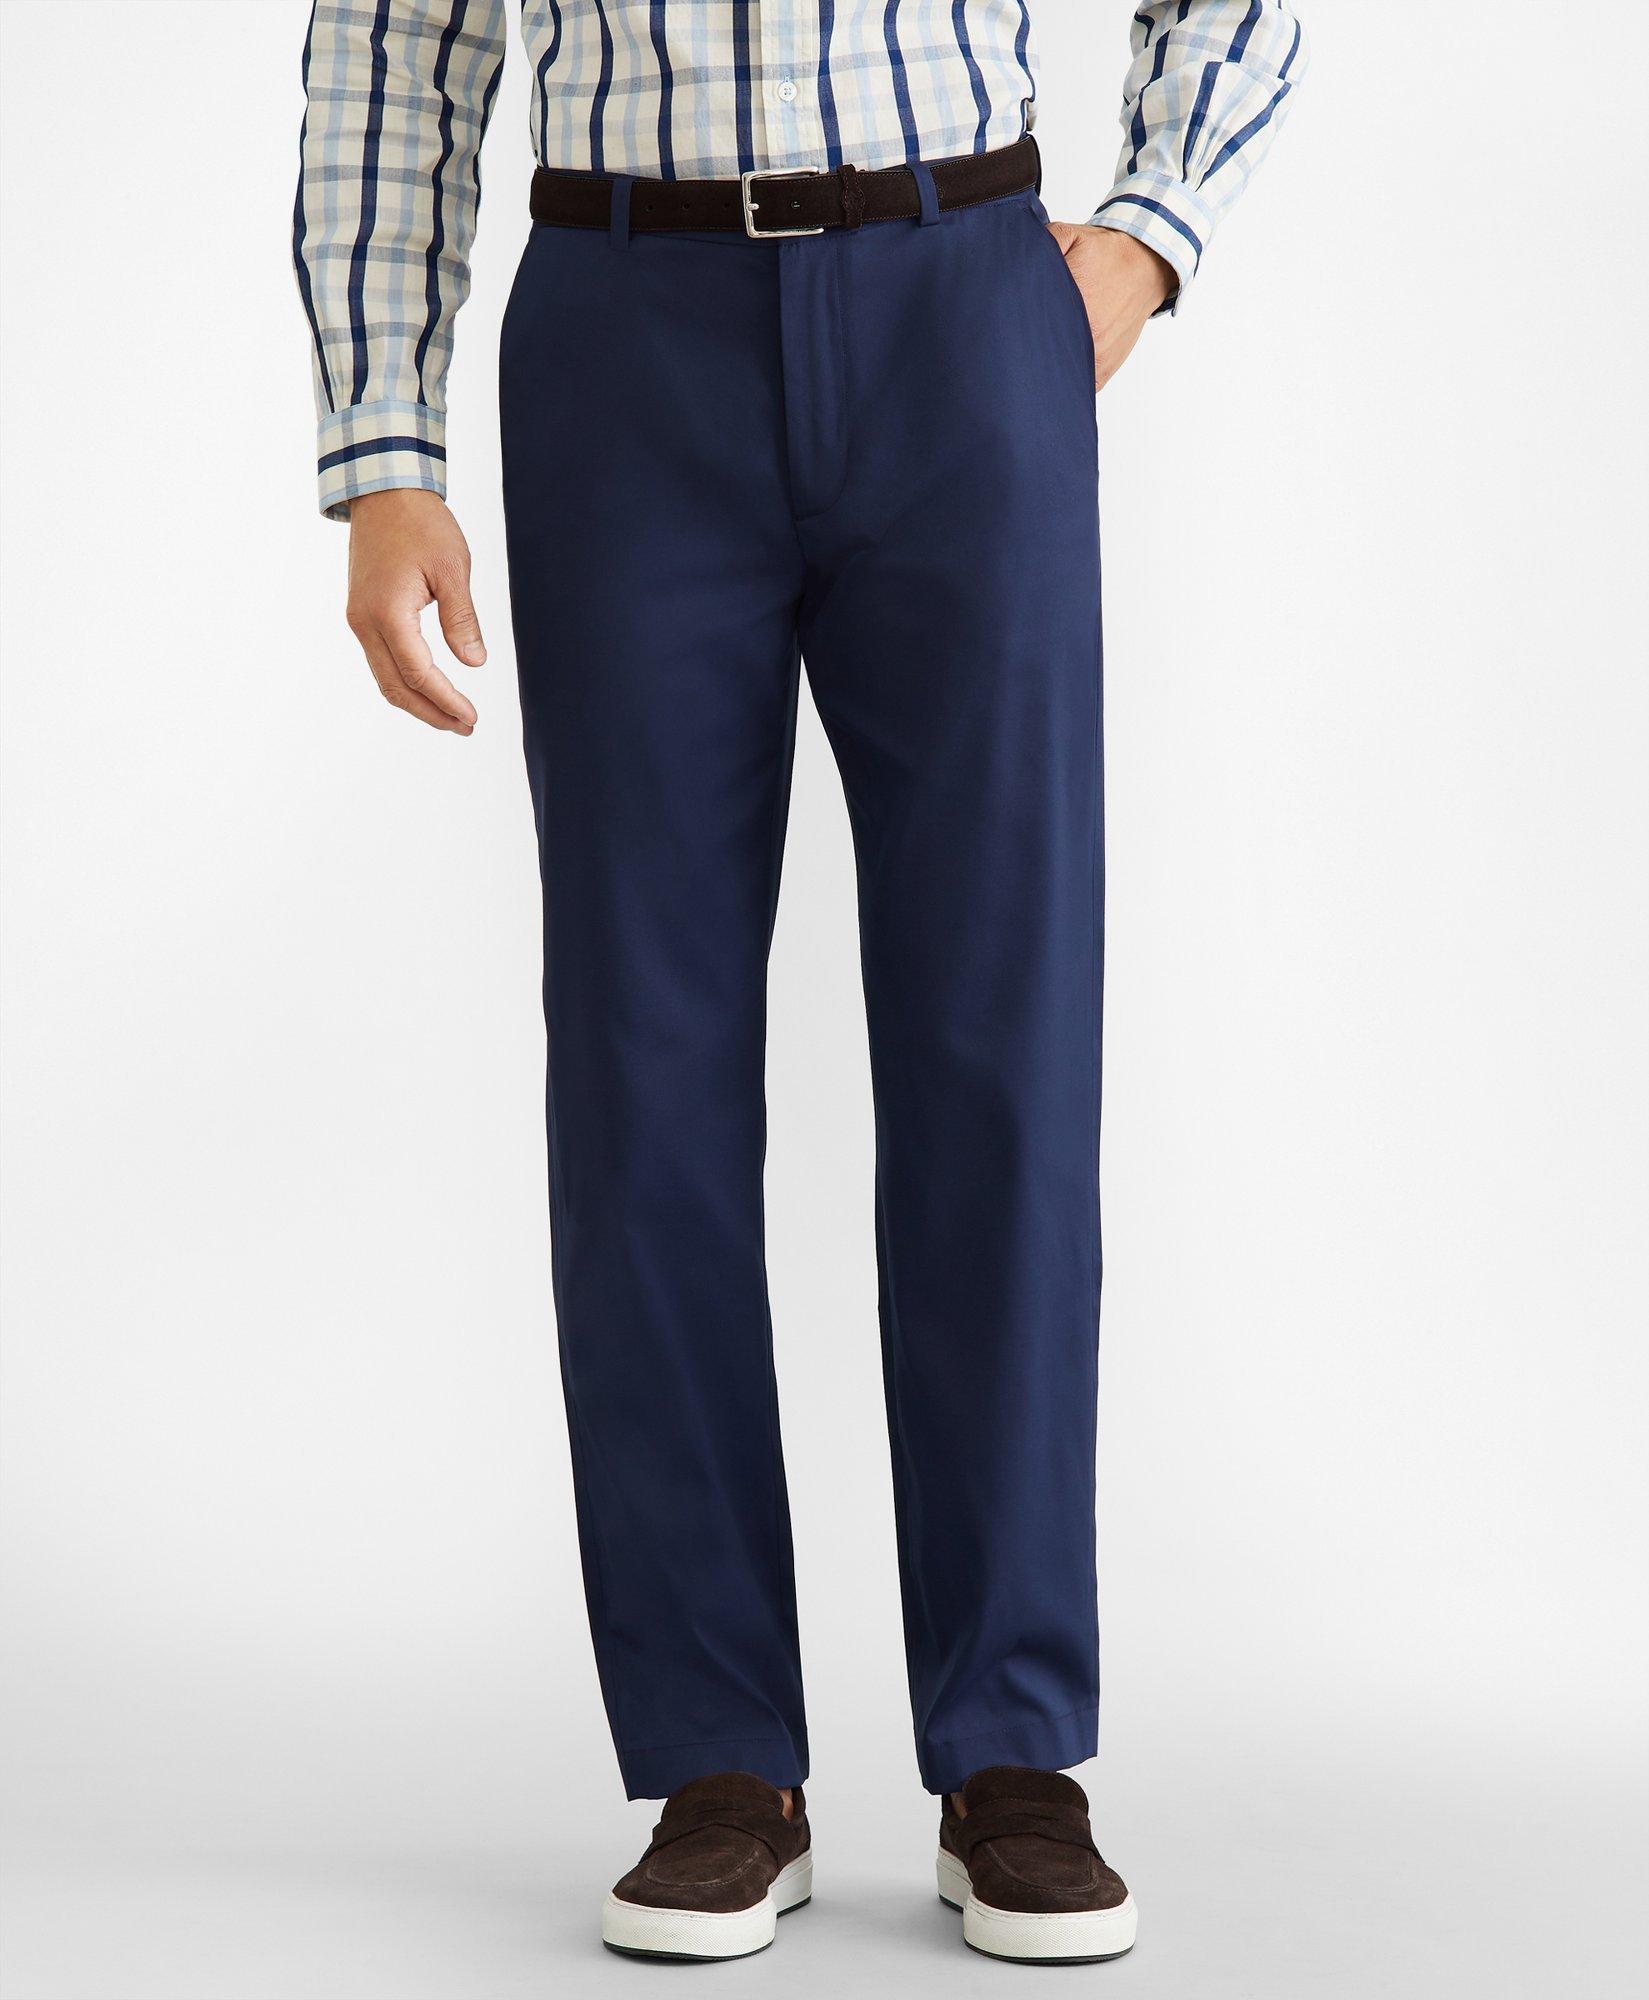 Clark Fit Brooks Brothers Stretch Performance Chino Pants